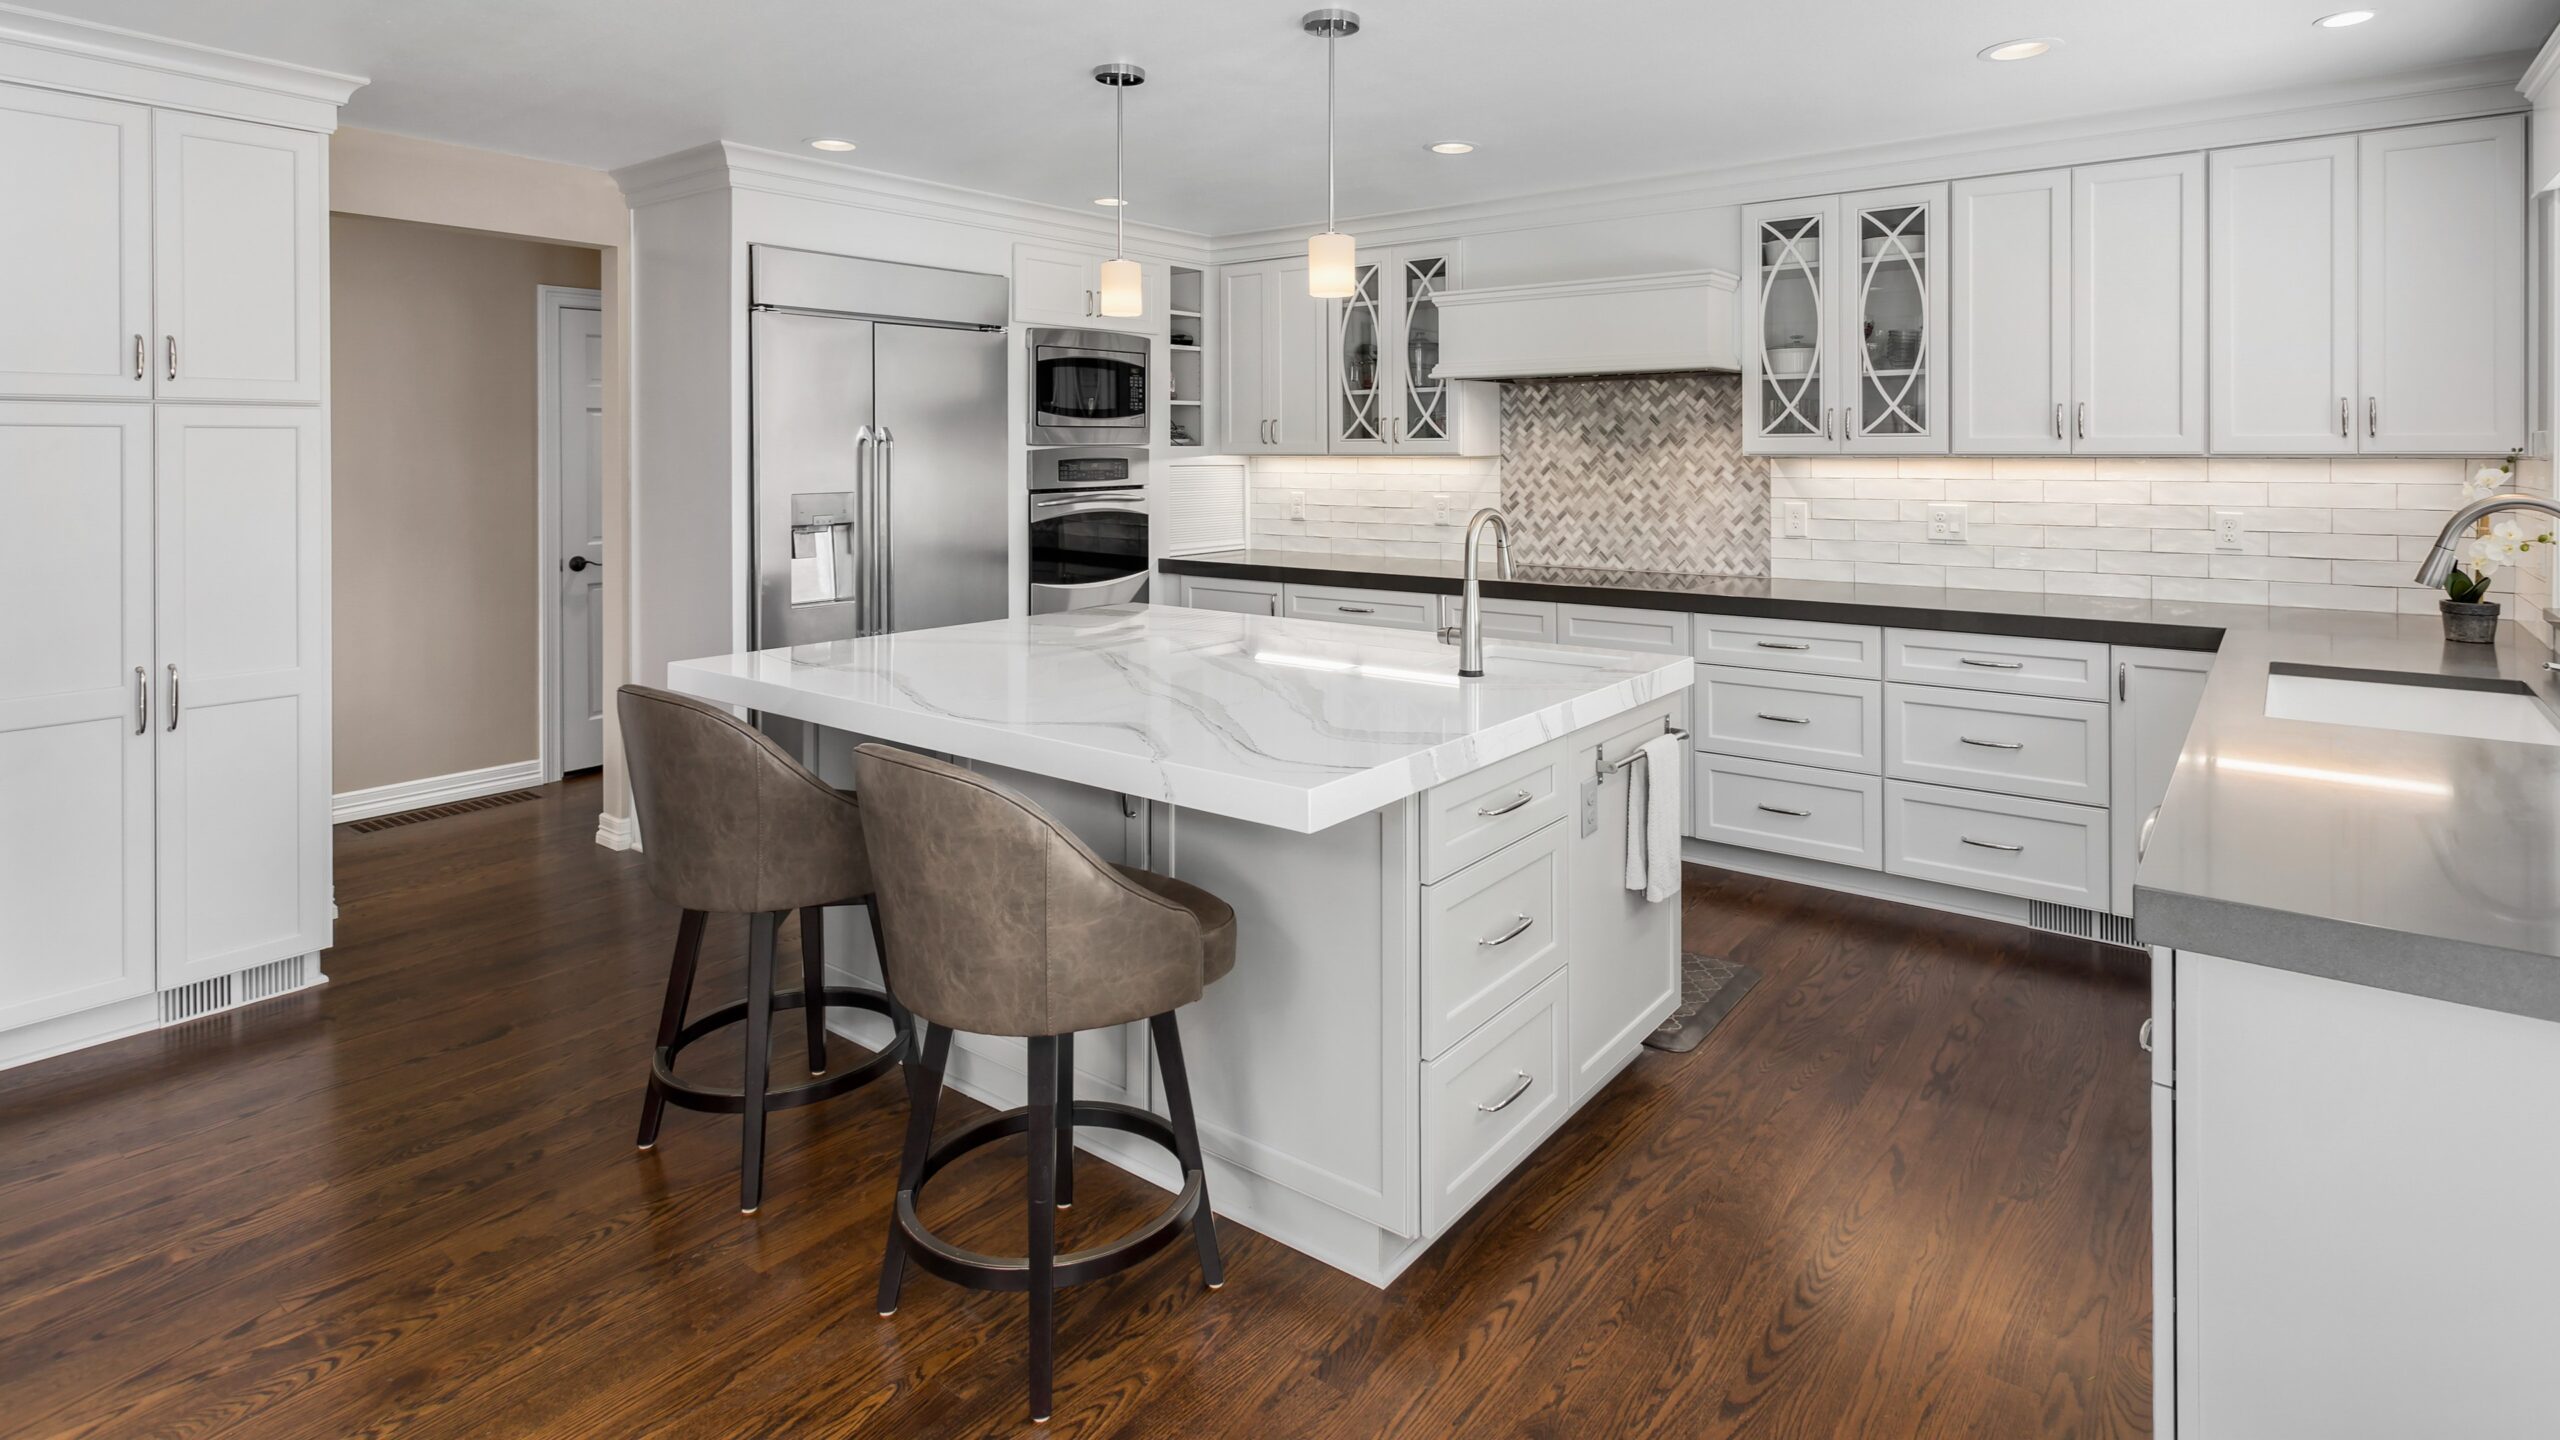 Modern kitchen in Waukesha County with beautiful hardwood floors, marble and metal countertops, and new cabinet refacing done by Colorwheel Painting